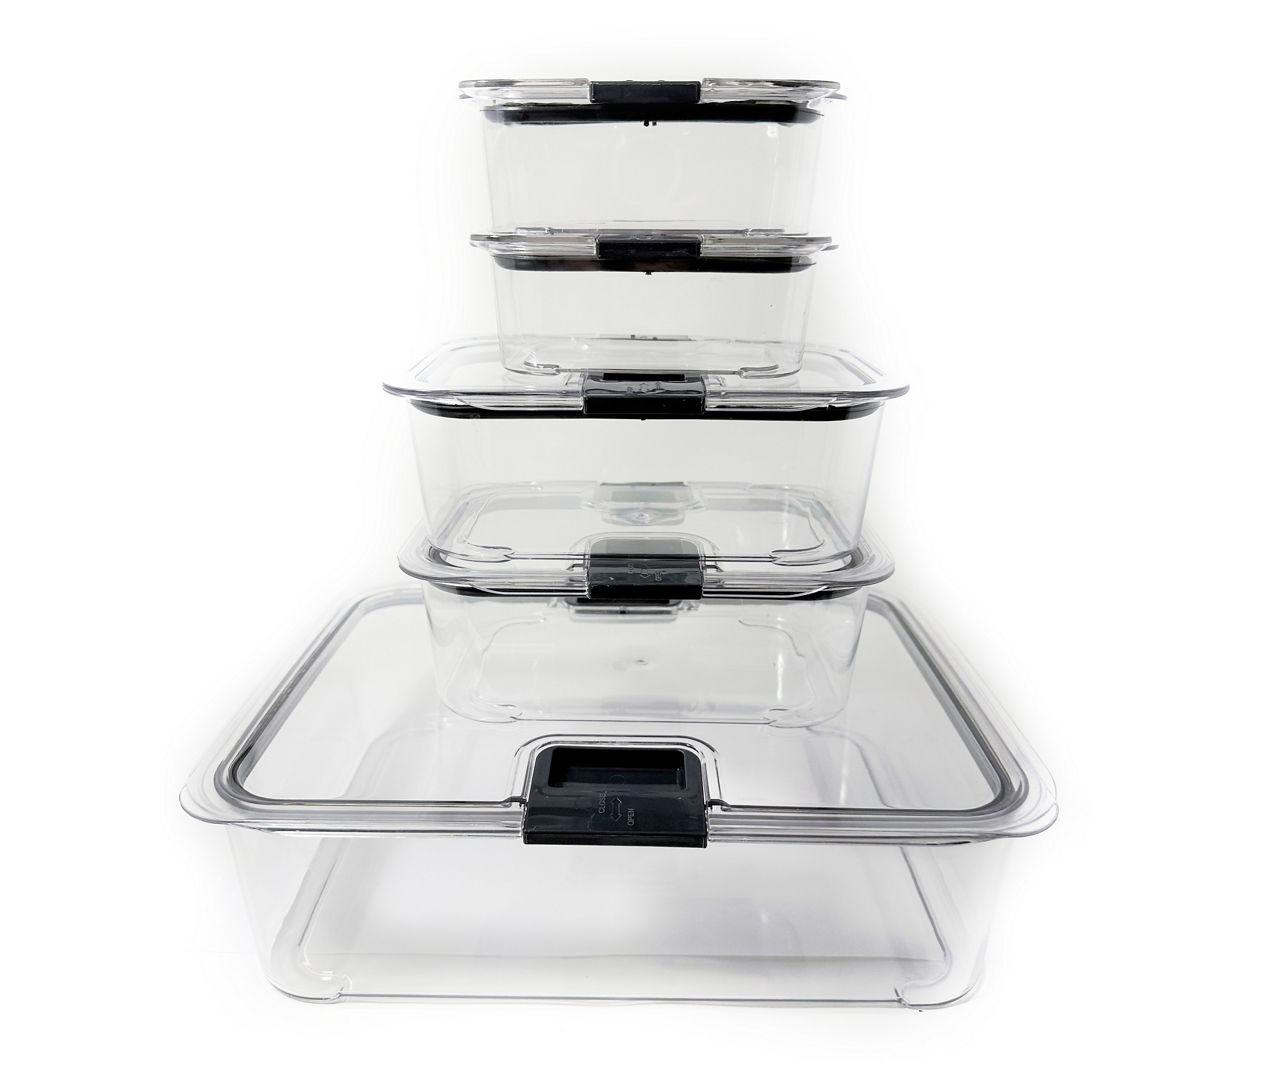 Home Expressions 10-pc. Acrylic Food Container Set, Color: Clear